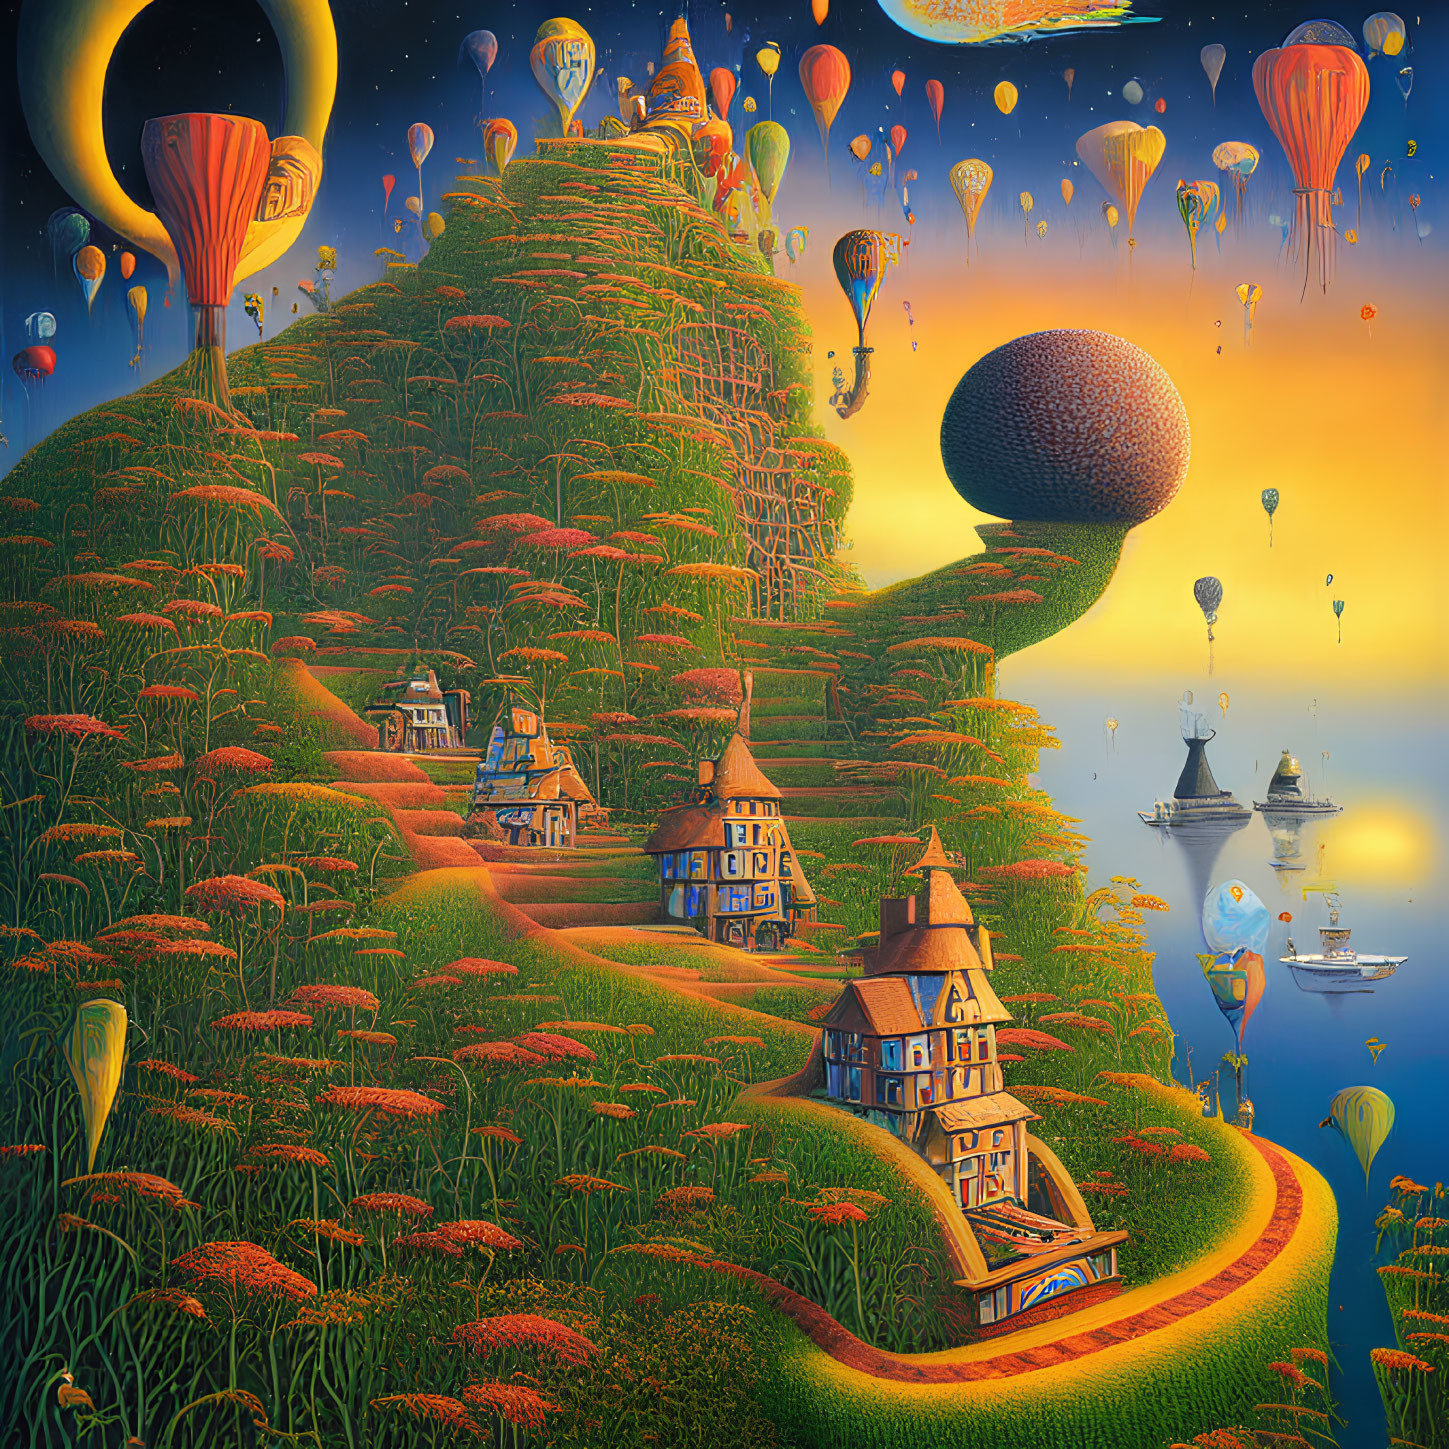 Colorful landscape with hot air balloons, ships, and quirky houses under sunset sky